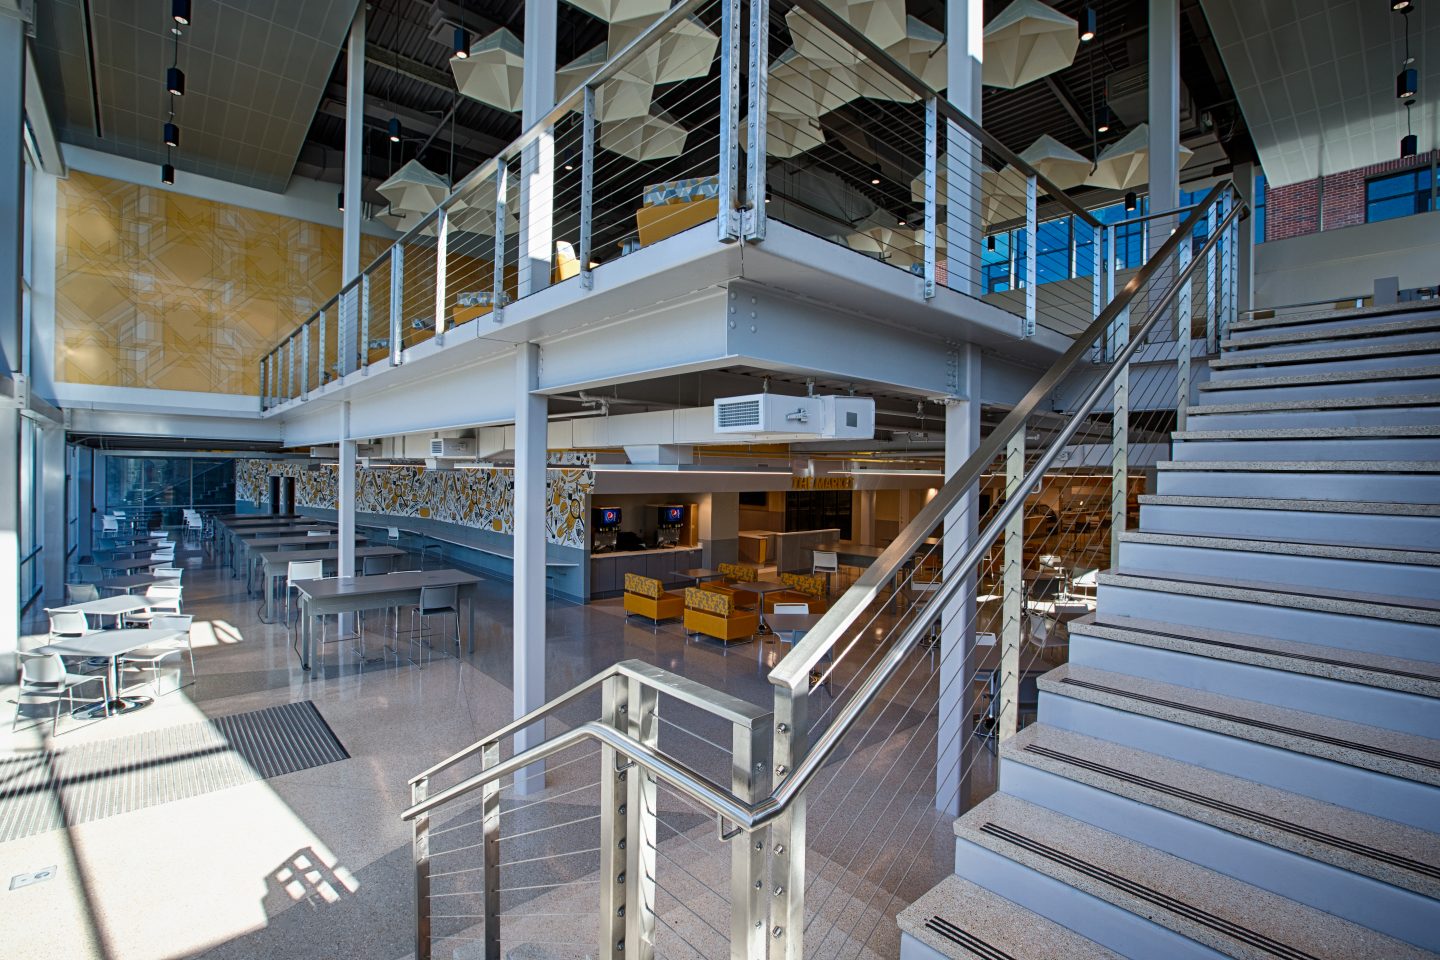 Staircase to the UC Dining Hall on the Lower Level